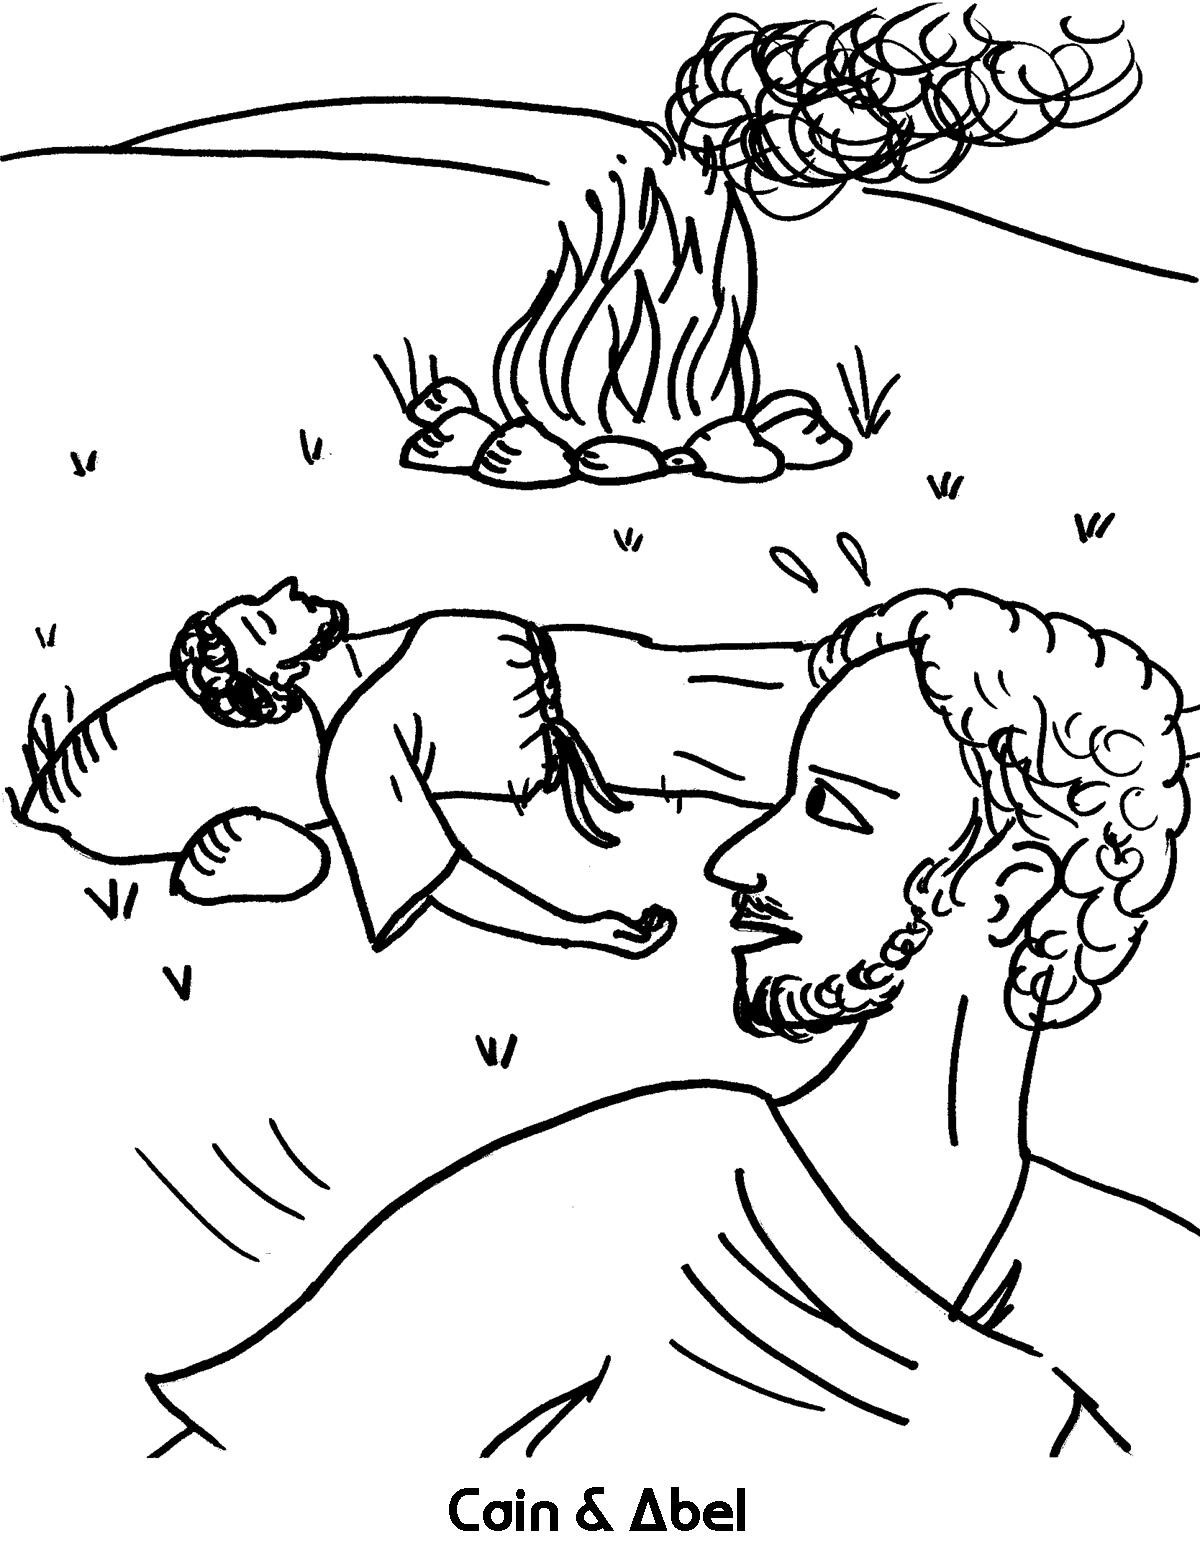 Cain And Abel Coloring Pages
 Cain and Abel Coloring Sheet